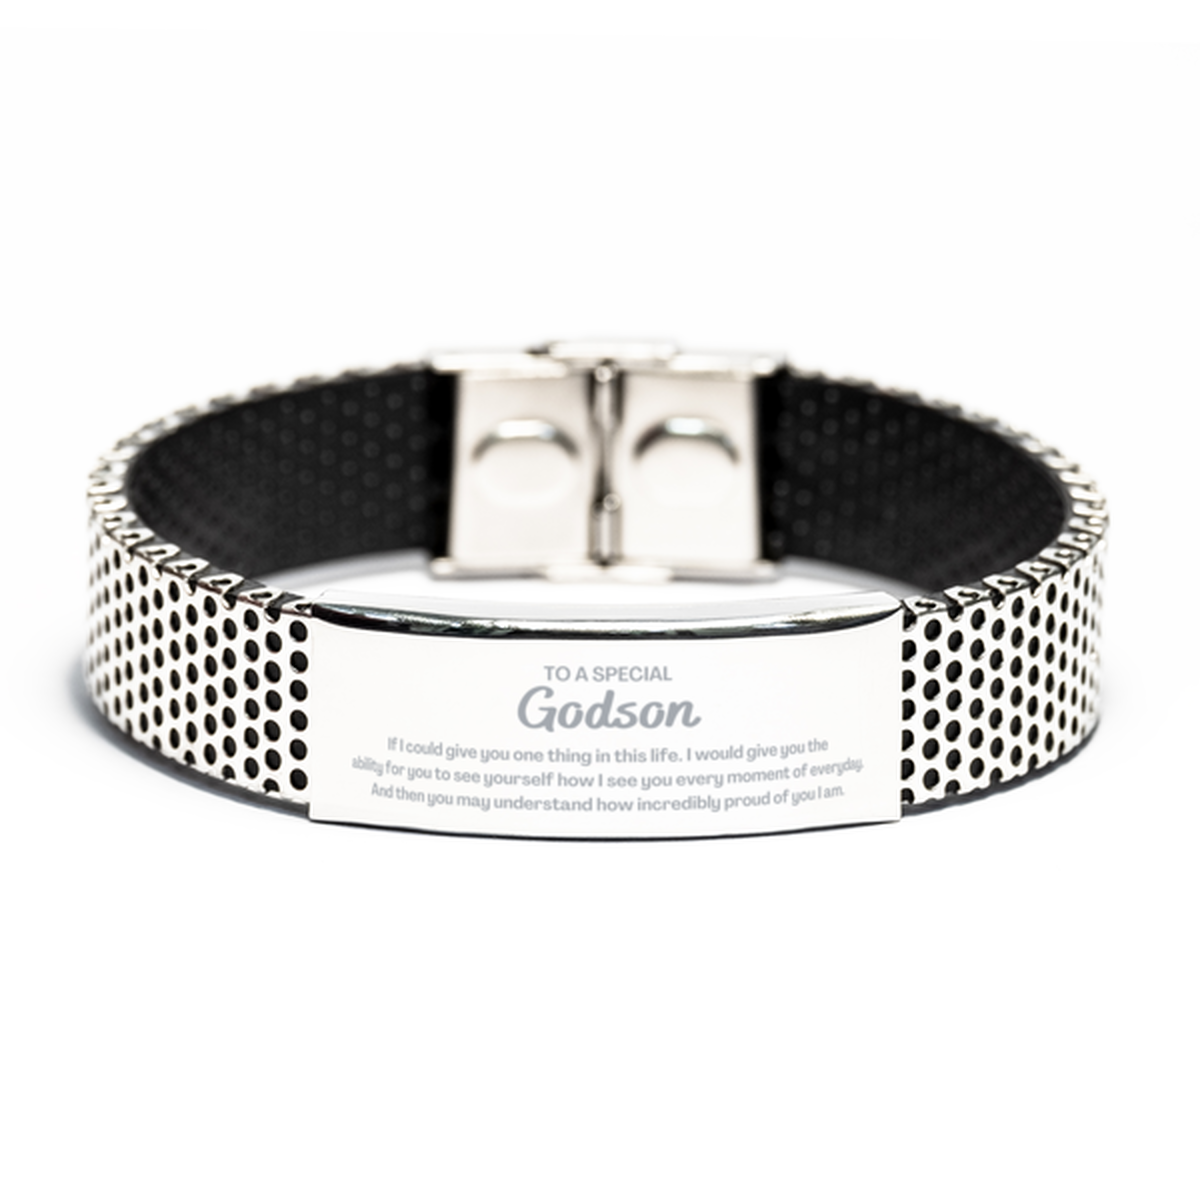 To My Godson Stainless Steel Bracelet, Gifts For Godson Engraved, Inspirational Gifts for Christmas Birthday, Epic Gifts for Godson To A Special Godson how incredibly proud of you I am